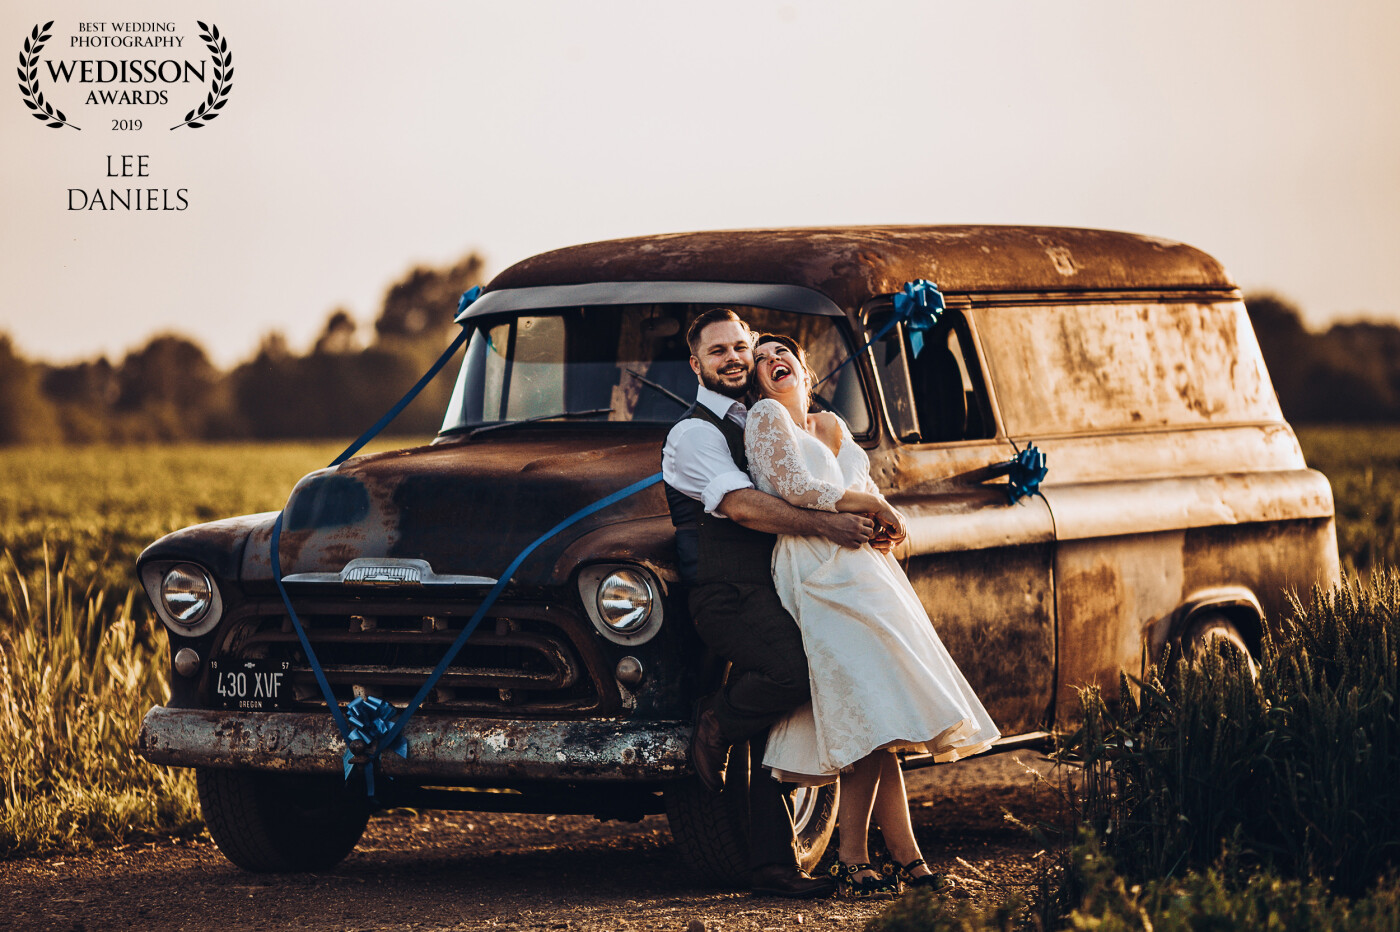 It was the hottest day of the year, so by the time sunset came around everyone was a lot happier. Lee’s Dad’s old truck proved to be a great prop; I had this image in my mind all day and just had to wait for the sun to get lower for the full effect. This pair added the final touch.